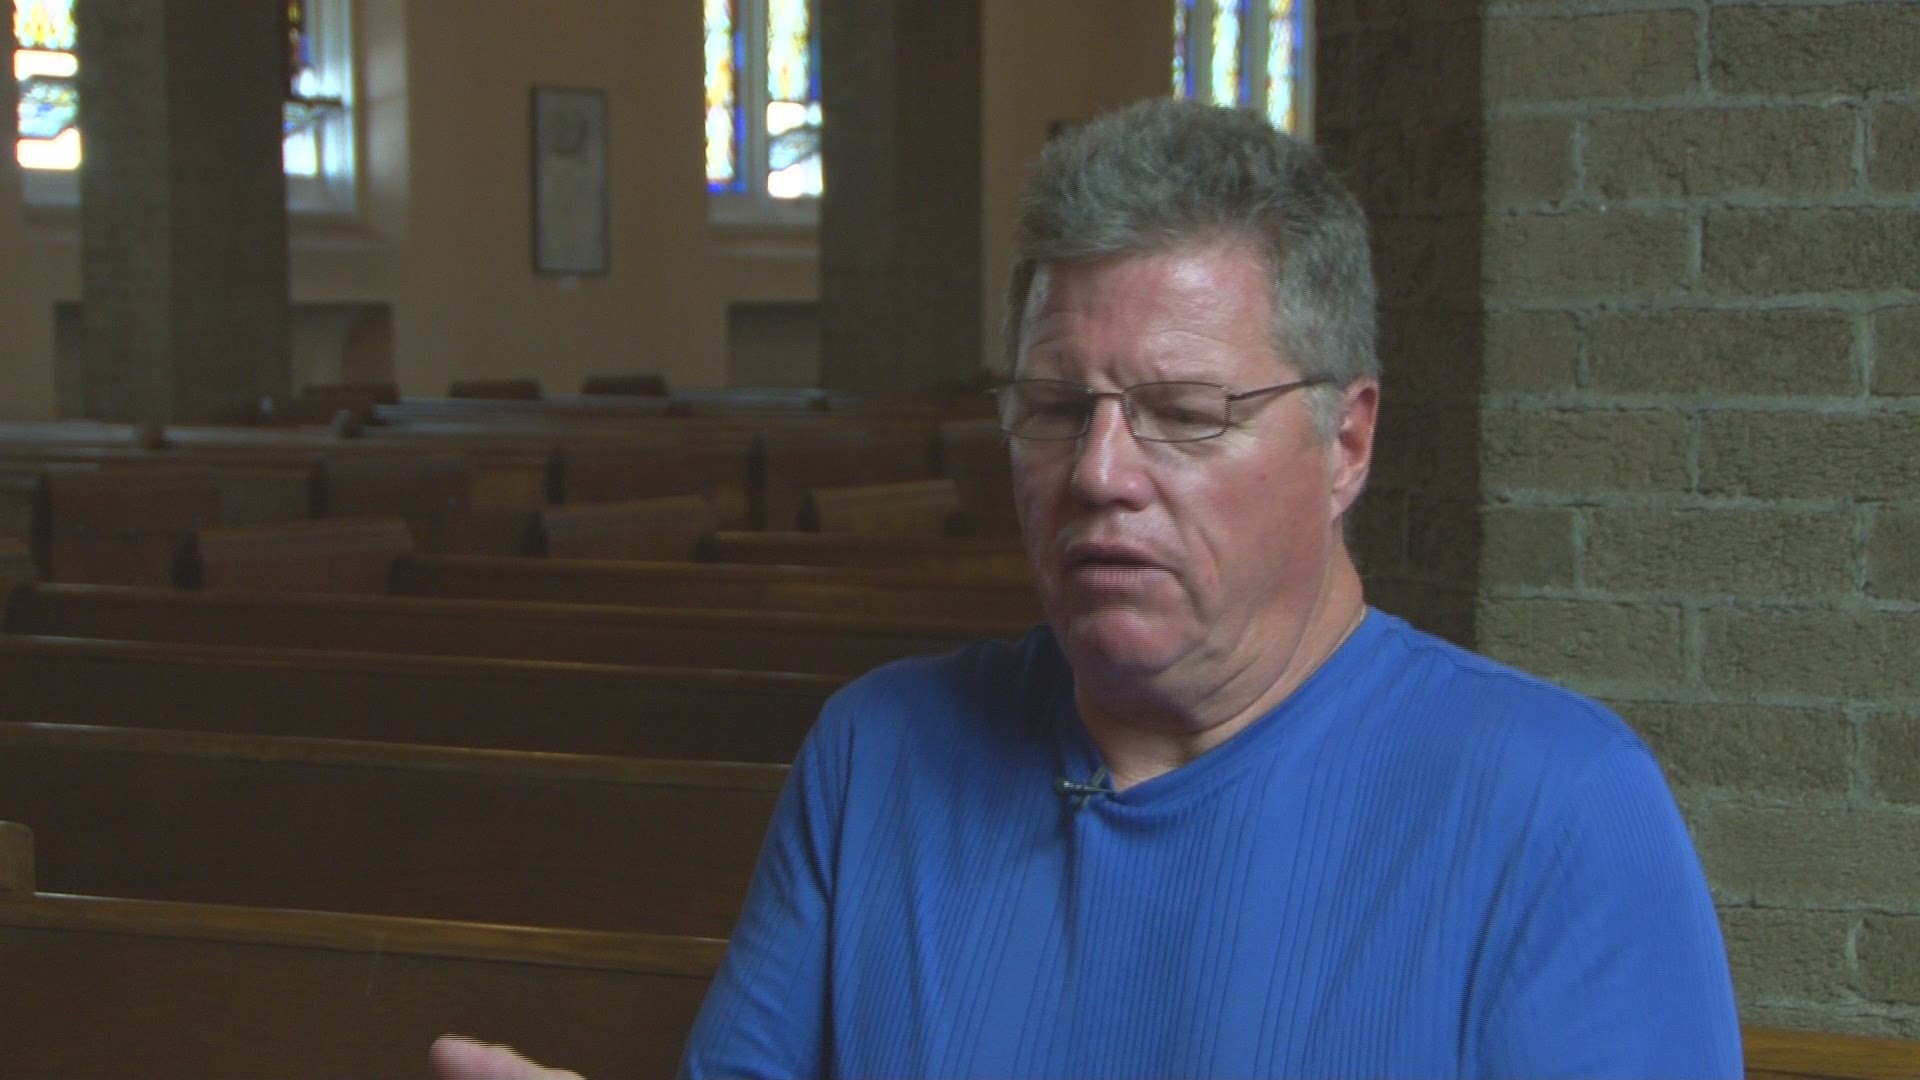 An East Side church keeps its spirit up after a recent break-in.